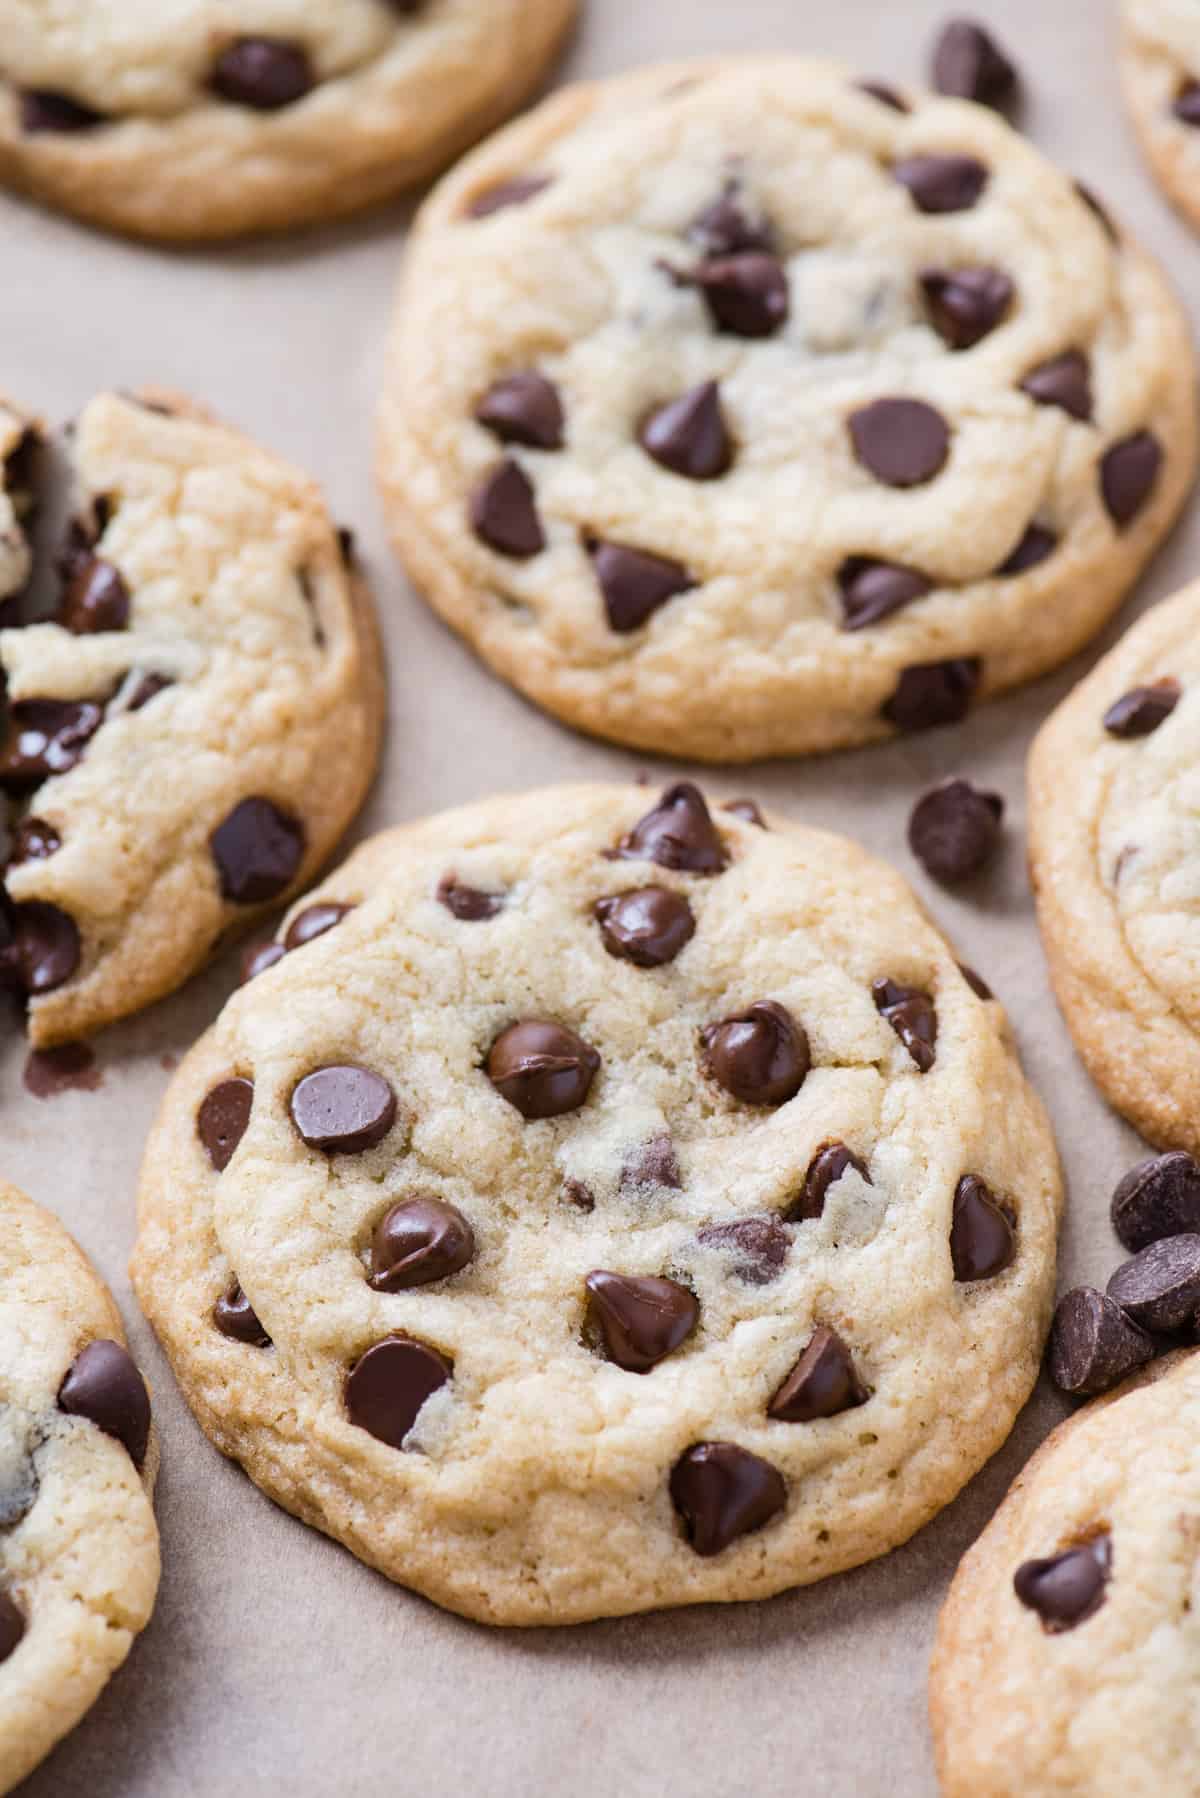 gluten free chocolate chip cookies arranged randomly on brown parchment paper